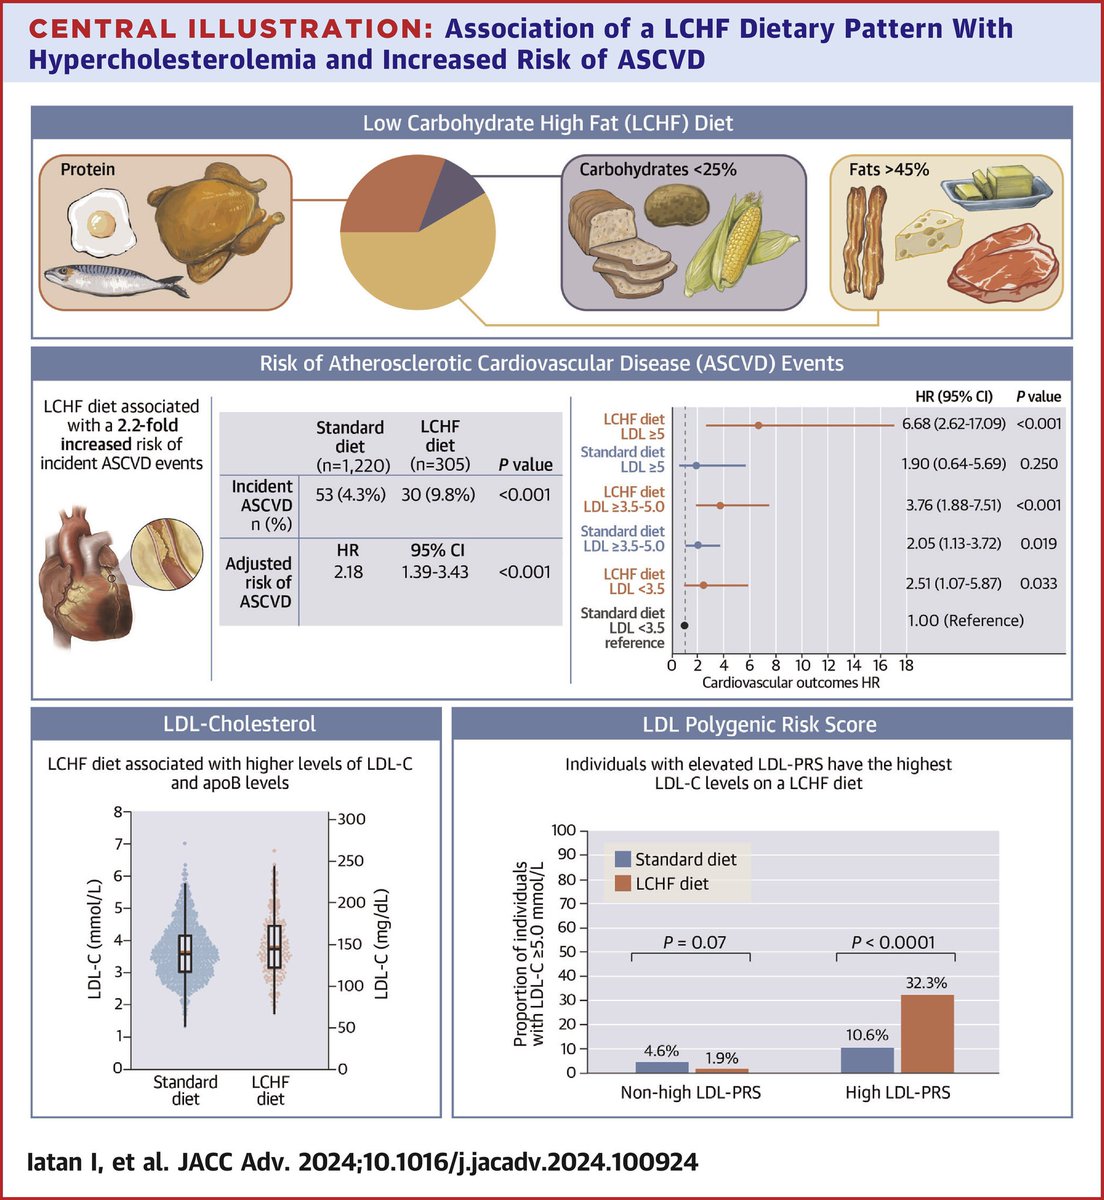 Journal of the American College of Cardiology: Low-Carbohydrate High-Fat Diet With Plasma Lipid Levels and CV Risk 'Consumption of a LCHF diet was associated with increased LDL-C and apoB levels, and an increased risk of incident MACE' jacc.org/doi/10.1016/j.… @drjkahn